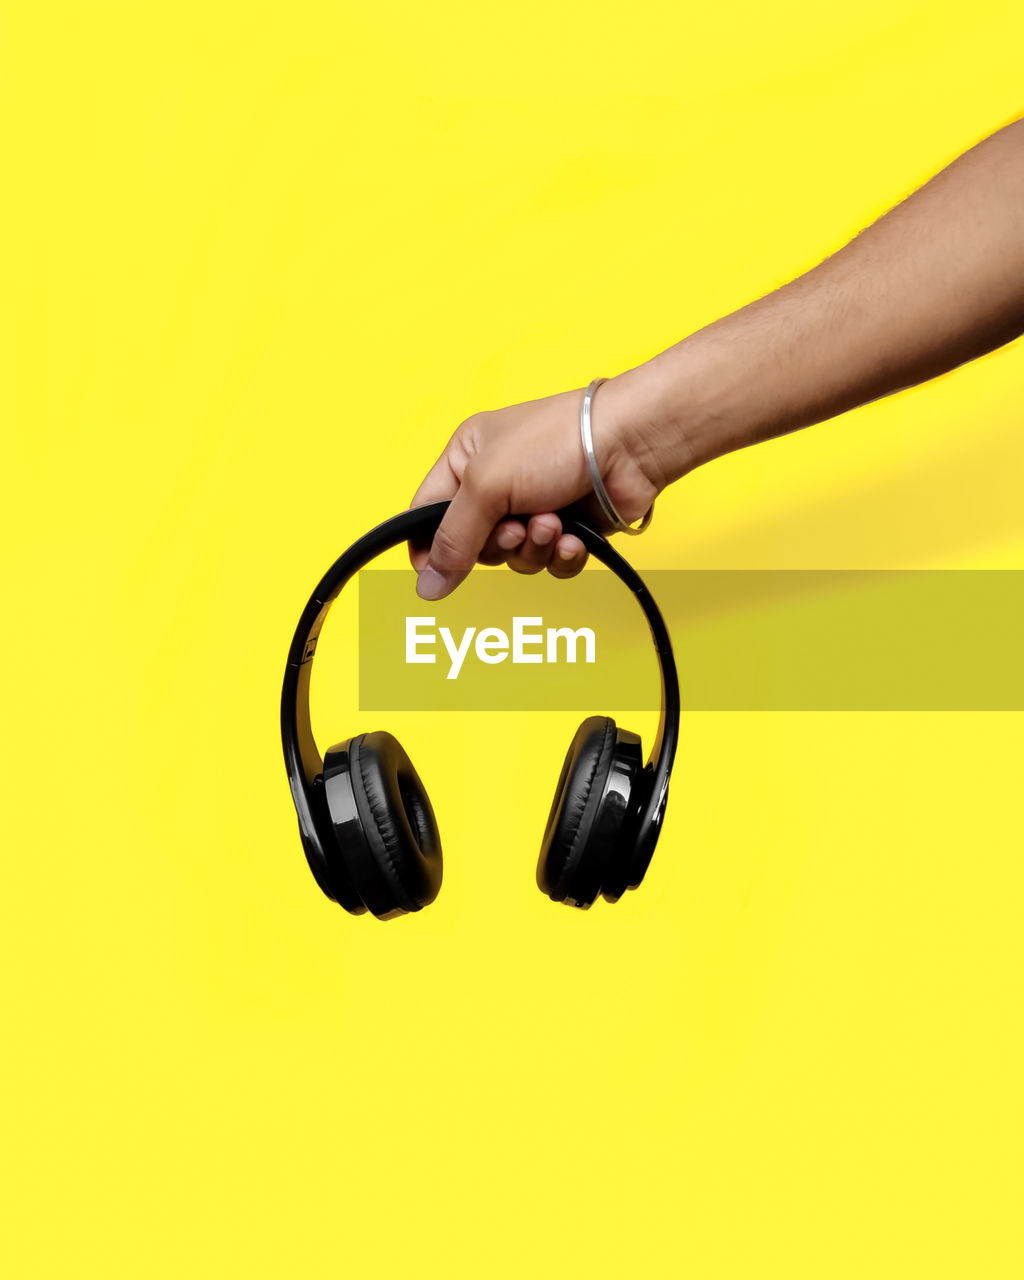 Cropped hand of man holding headphones against yellow background